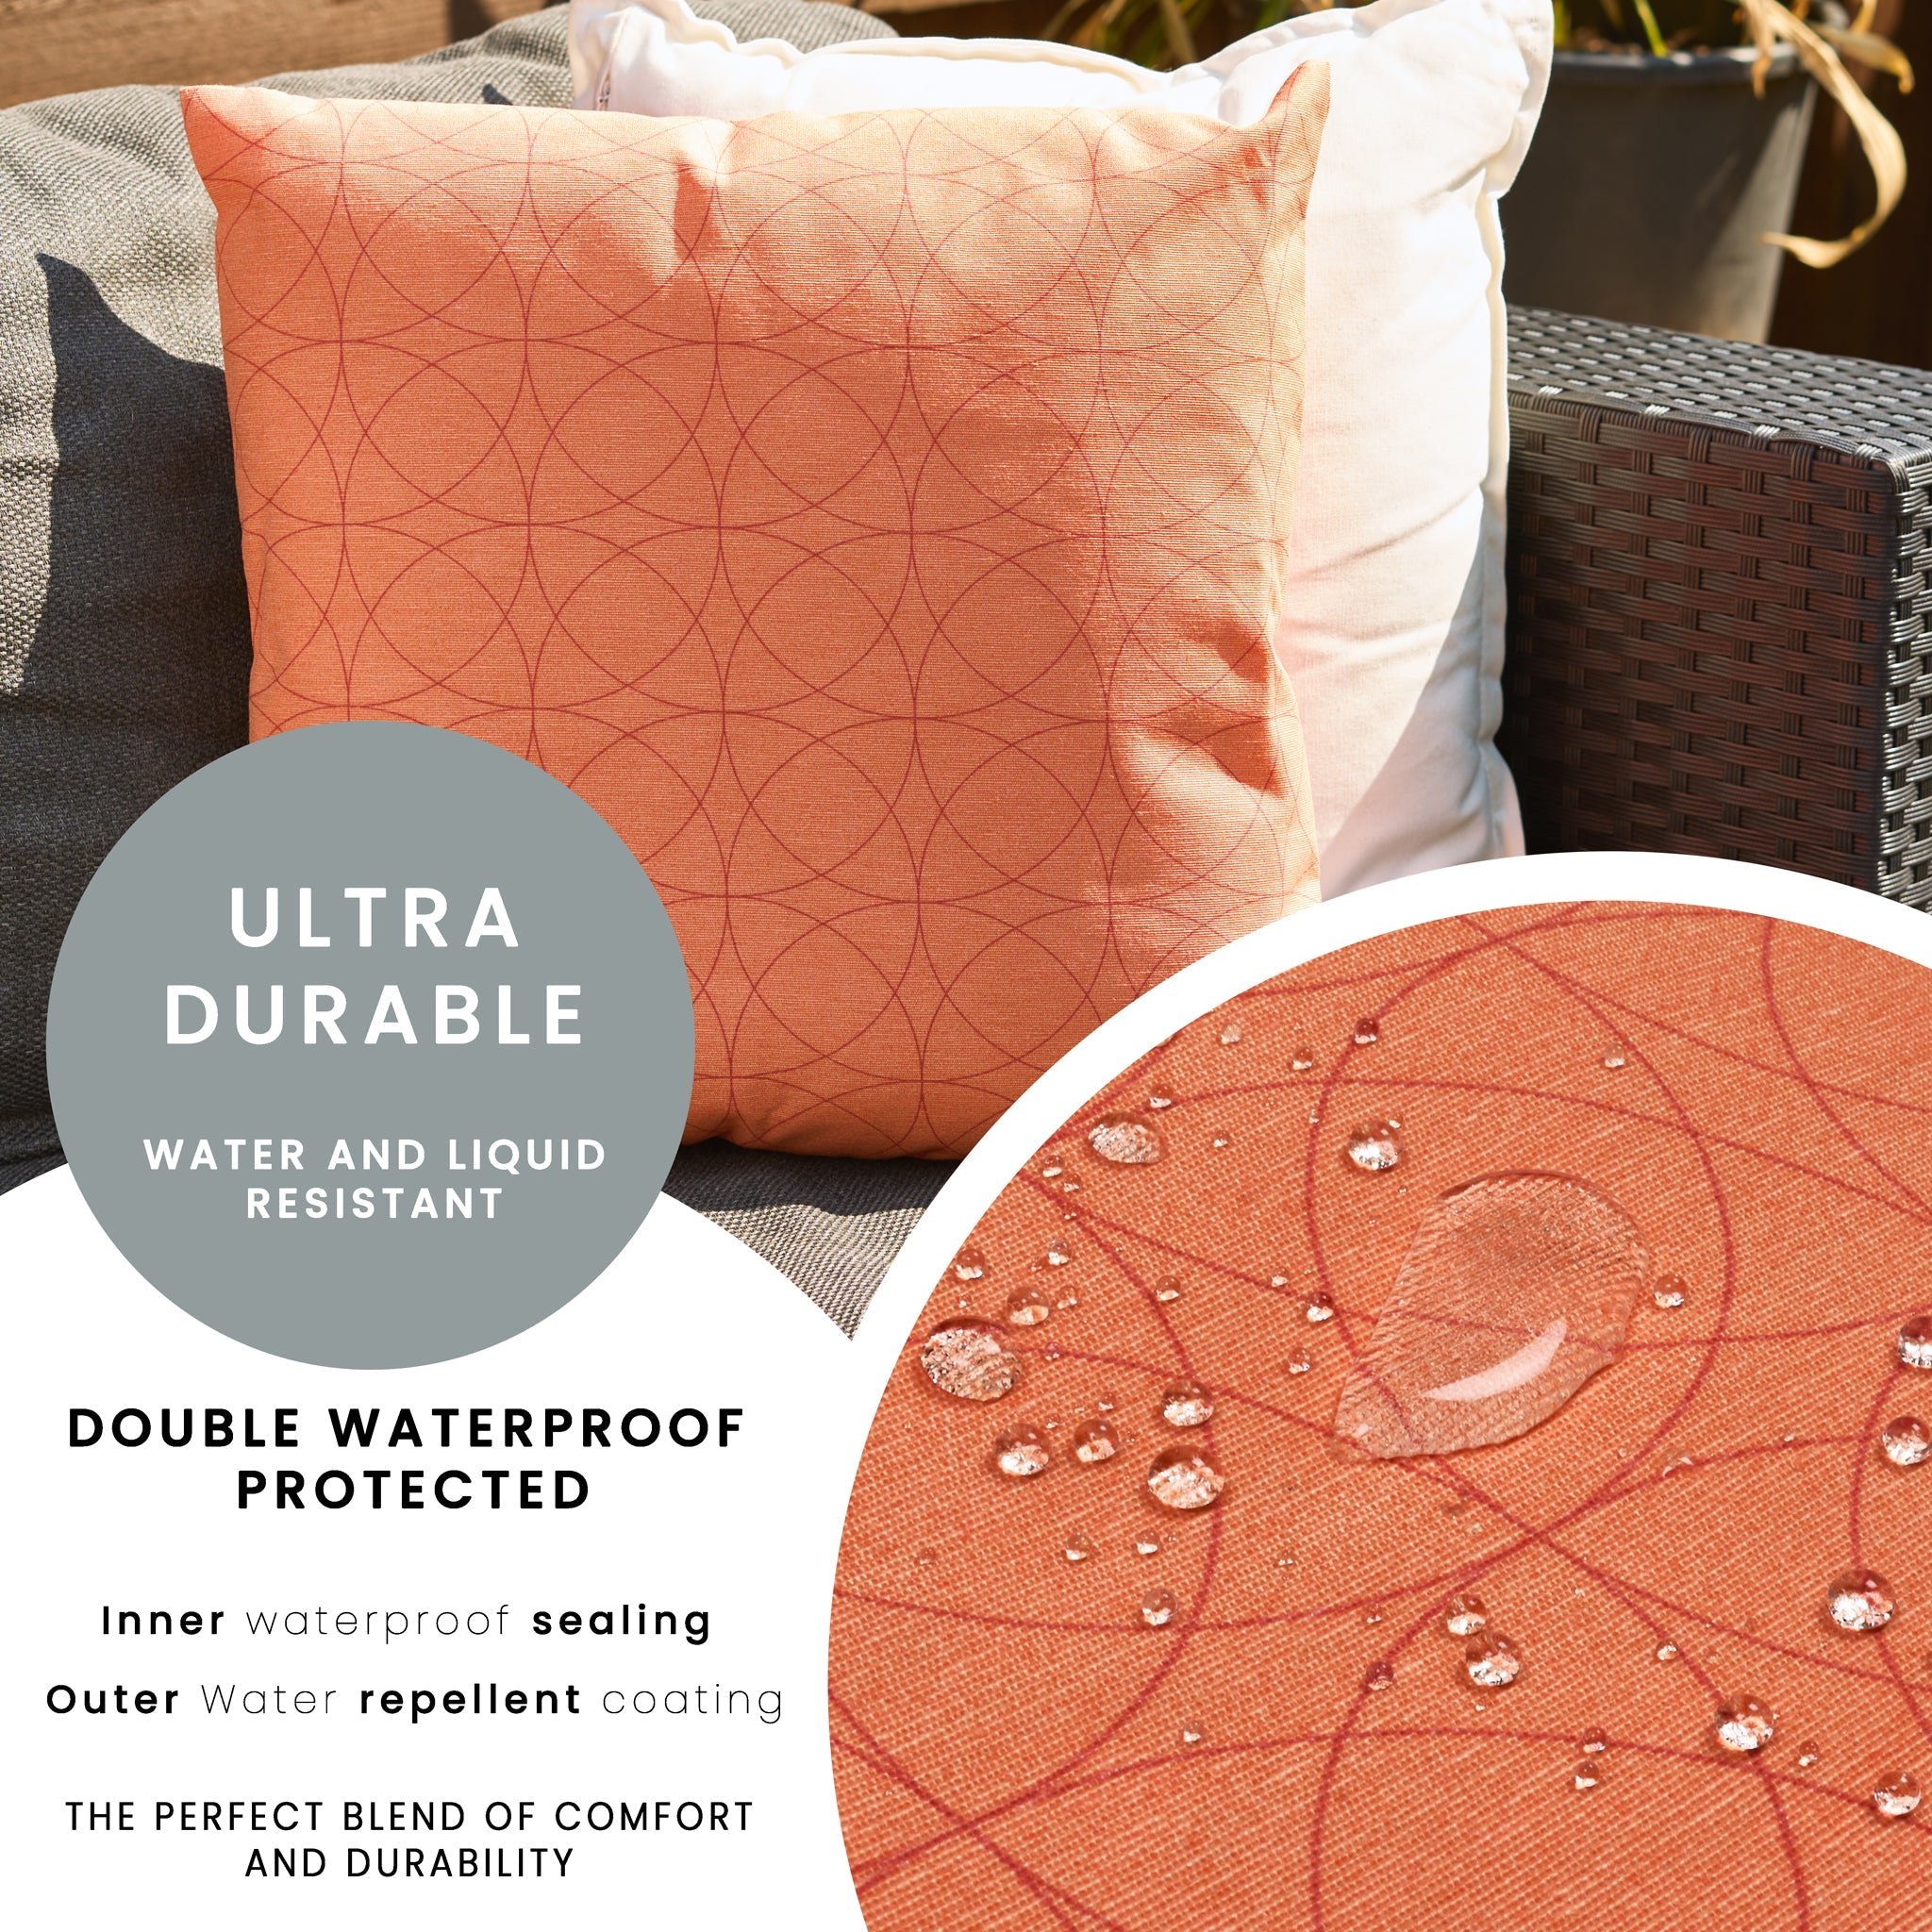 Coral Geometric Outdoor Garden Cushion - 42 x 42cm-8713229053635-only5pounds.com